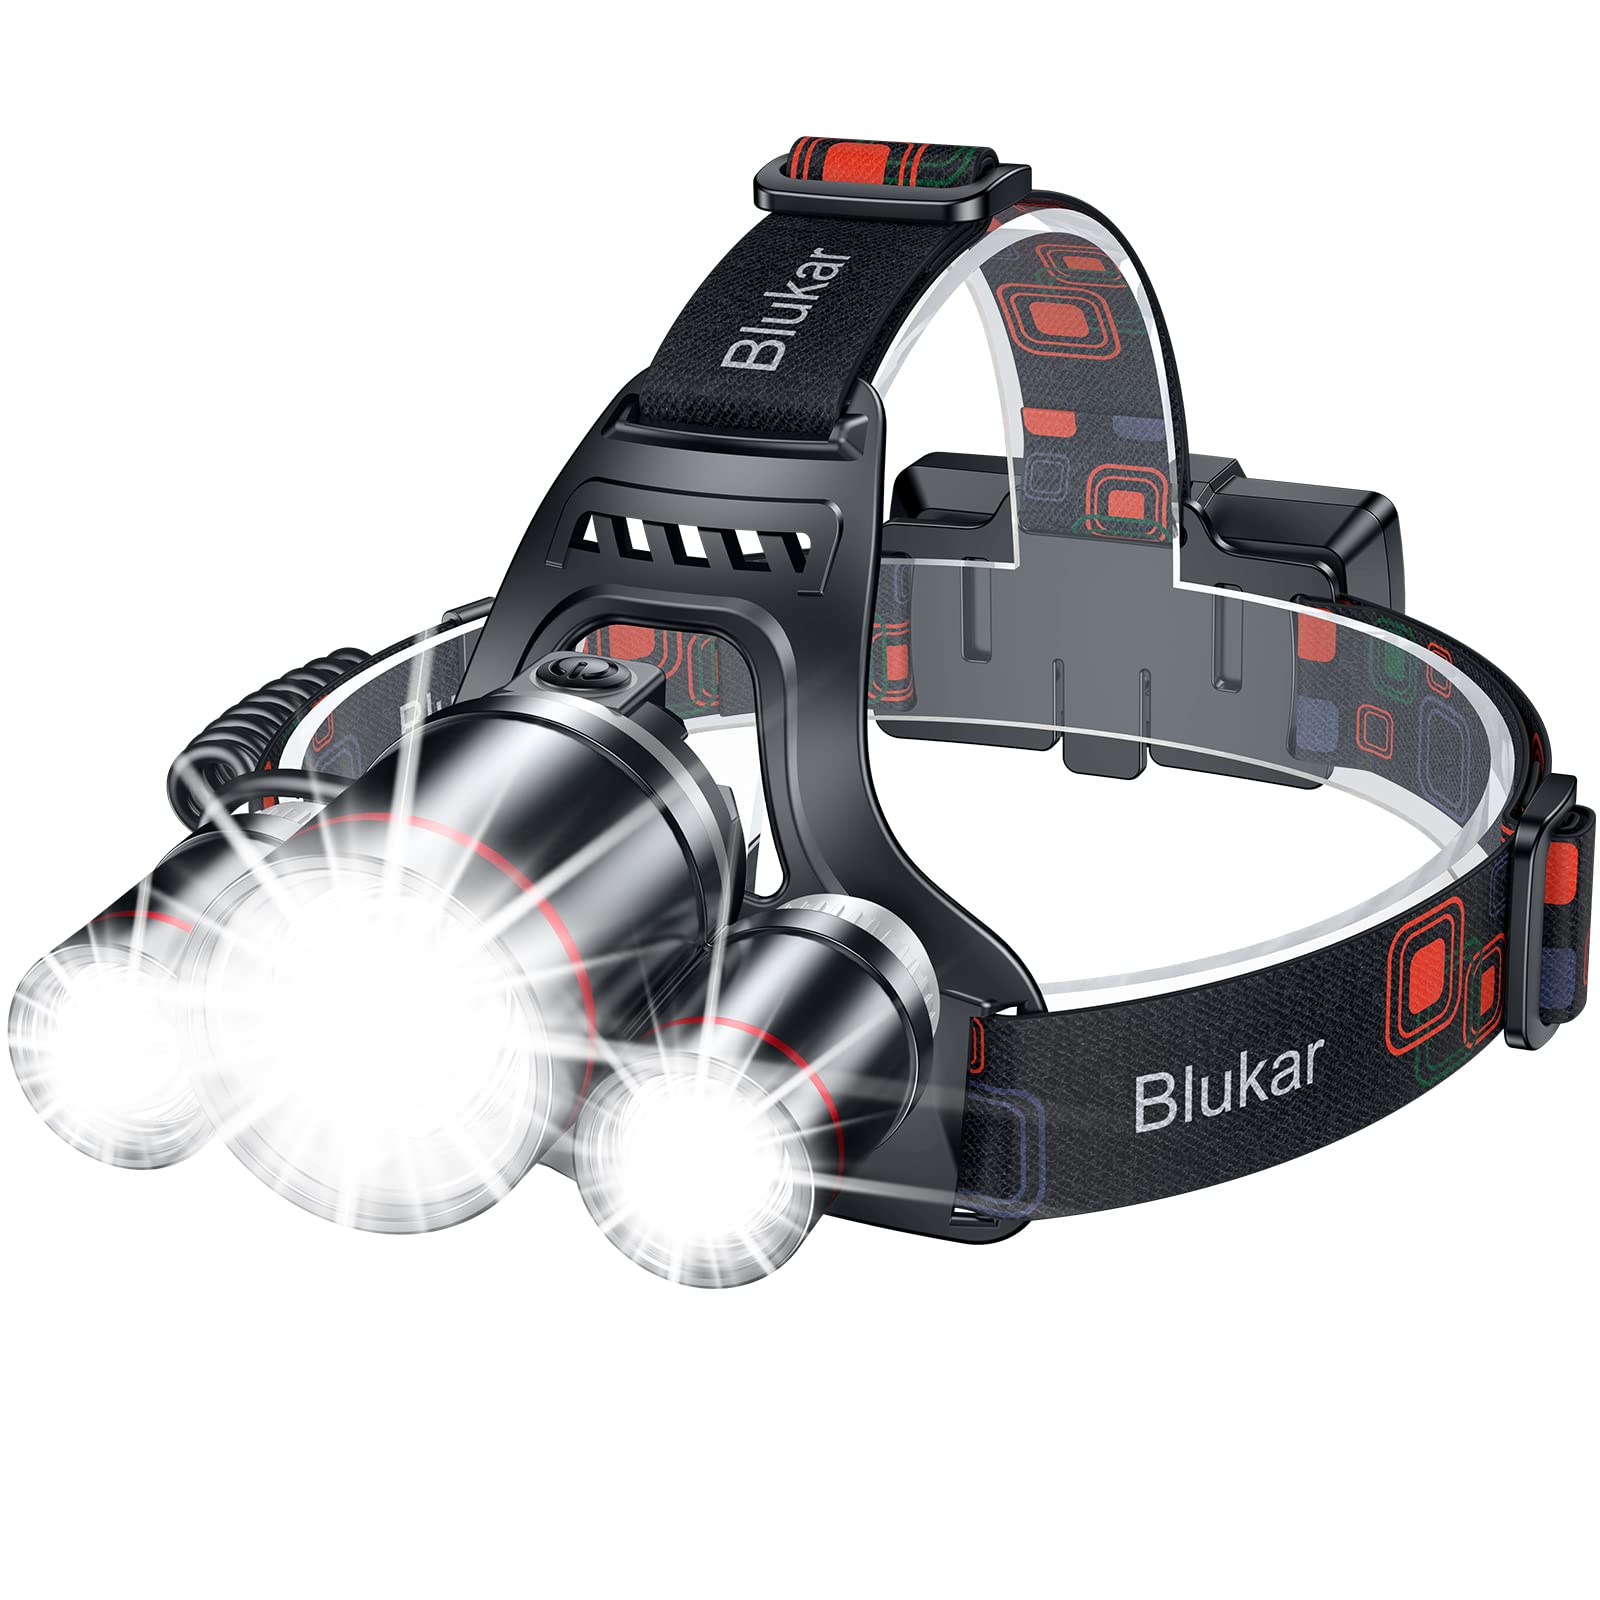 Blukar IPX6 Waterproof Adjustable Focus Headlight Rechargeable with 3 Lights 5 Modes (8000L)